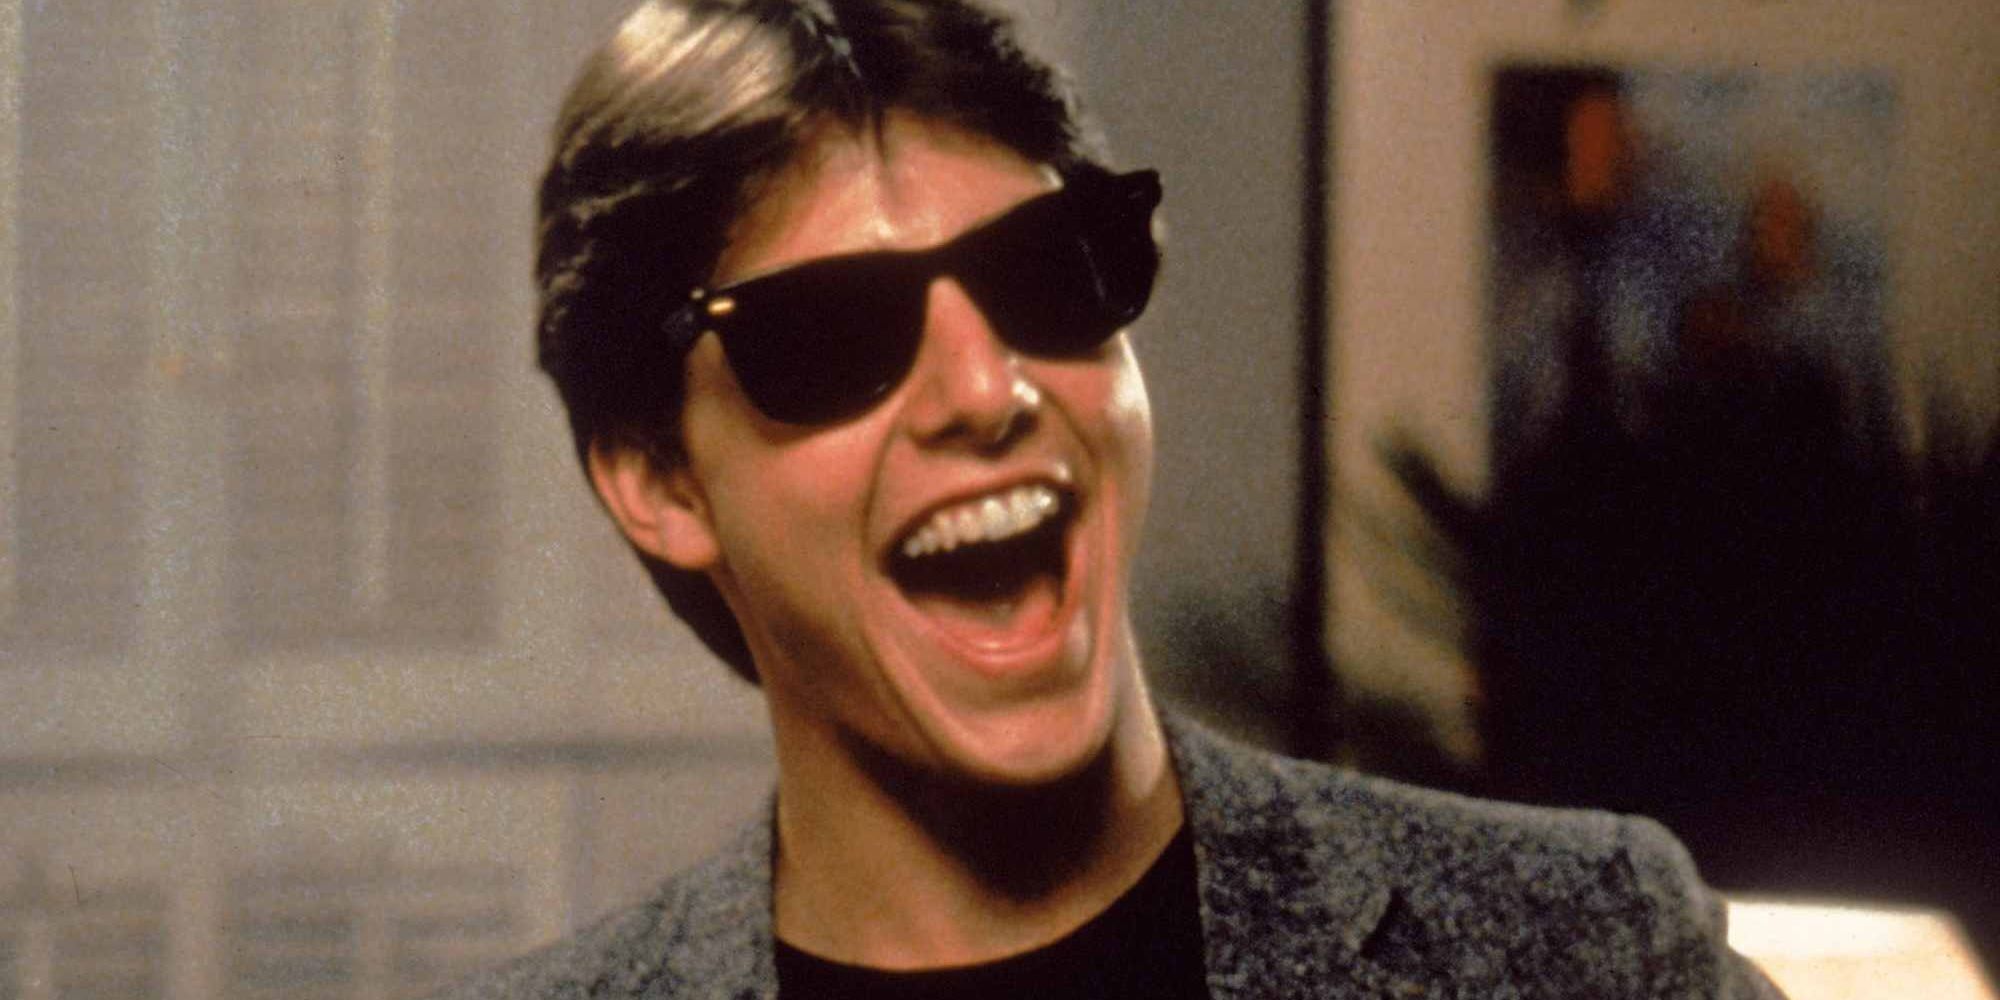 Tom Cruise wears sunglasses and smiles wide in Risky Business.